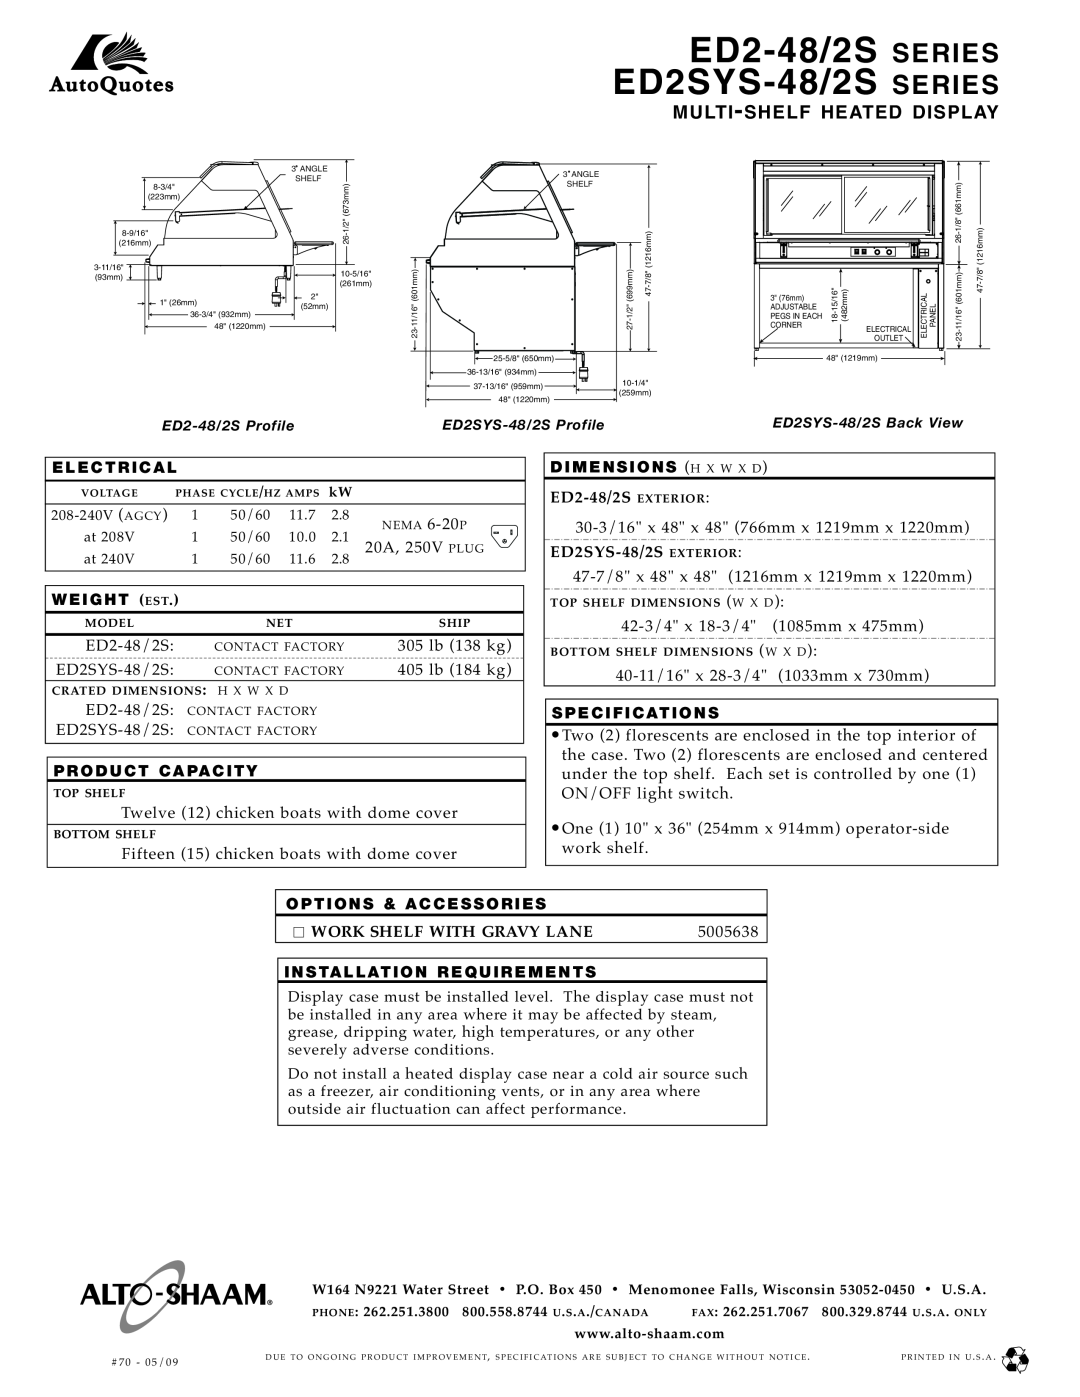 Alto-Shaam ED2SYS-2S ED2-4 8/2 S EXTERIOR, Work Shelf Wi Th Gravy Lane, ED2-48/2S ED2SYS-48/2S, Series Series, Electr Ical 